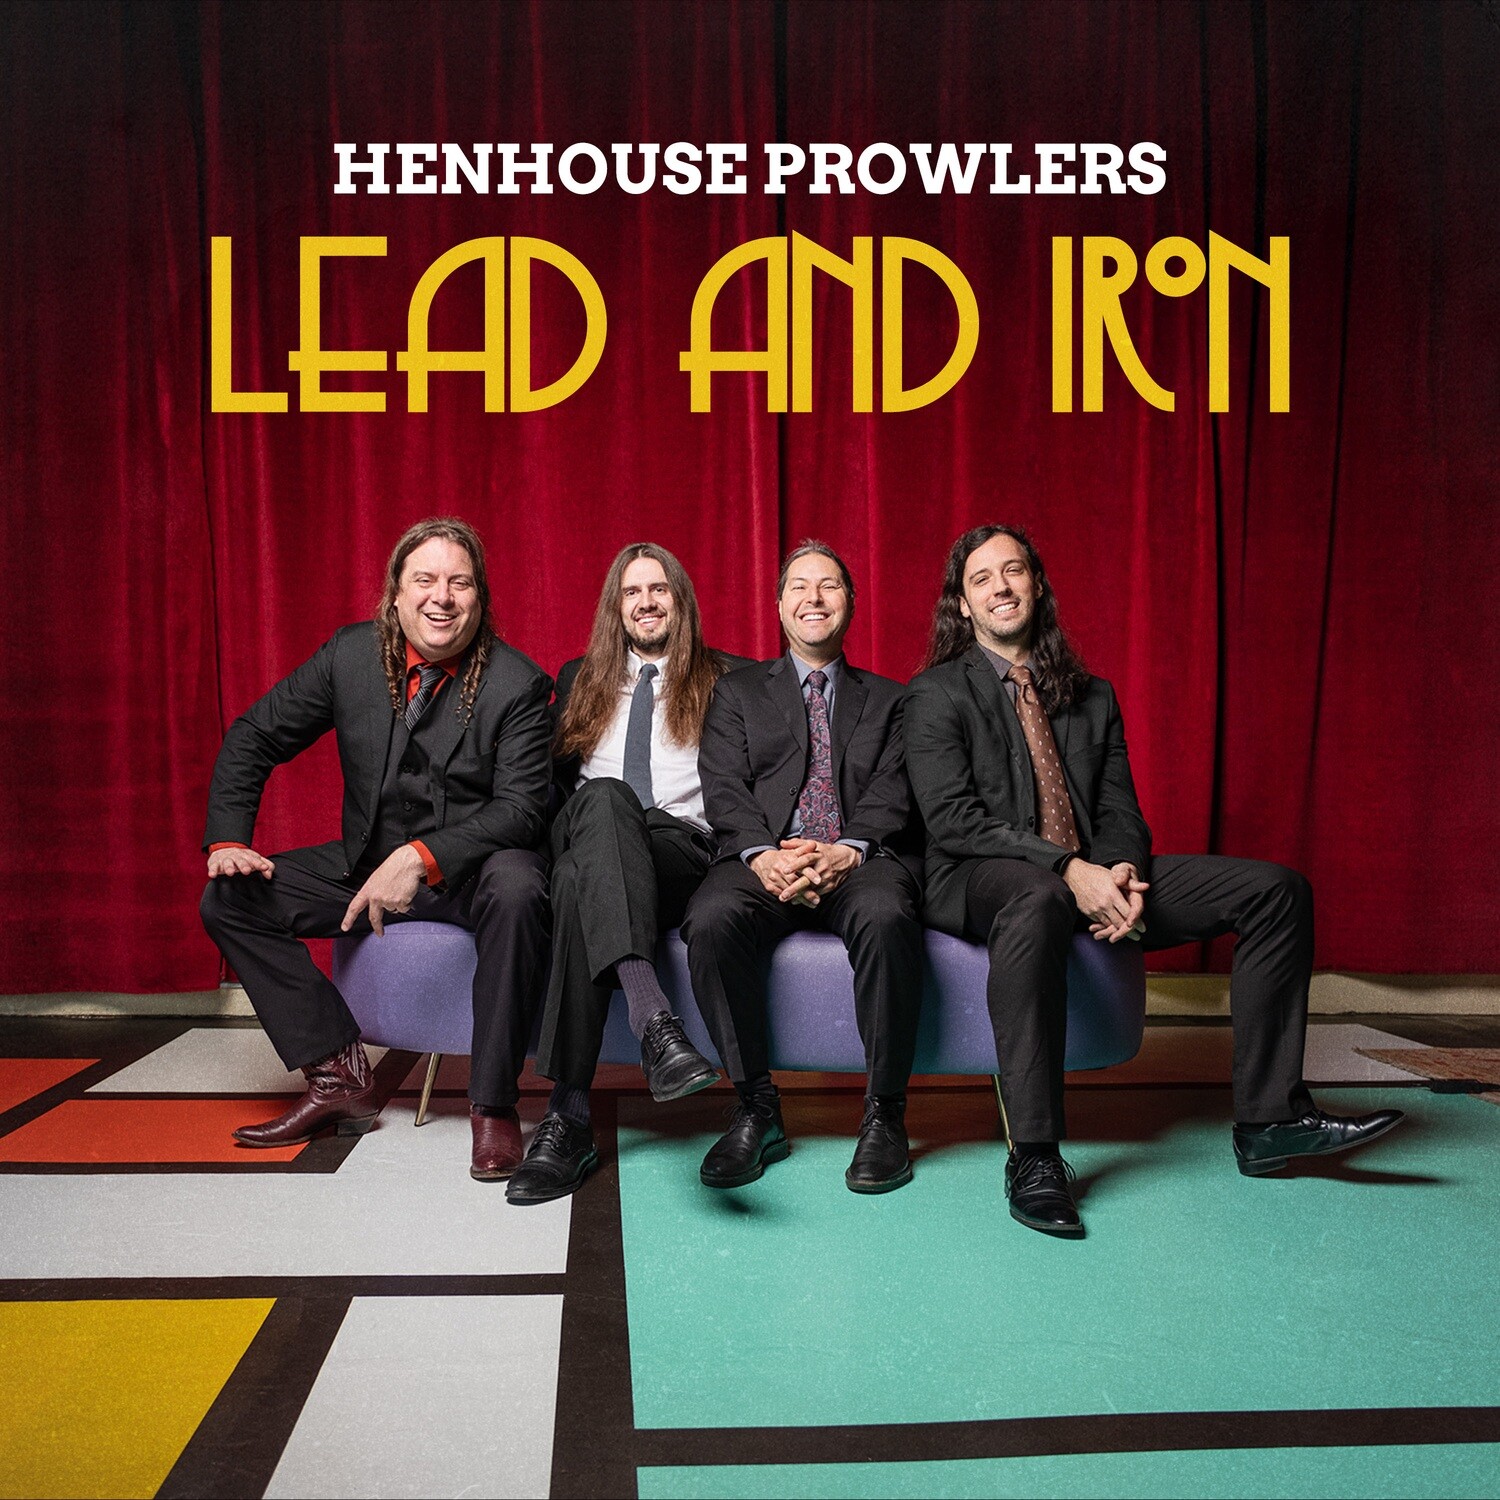 Henhouse Prowlers Lead and Iron